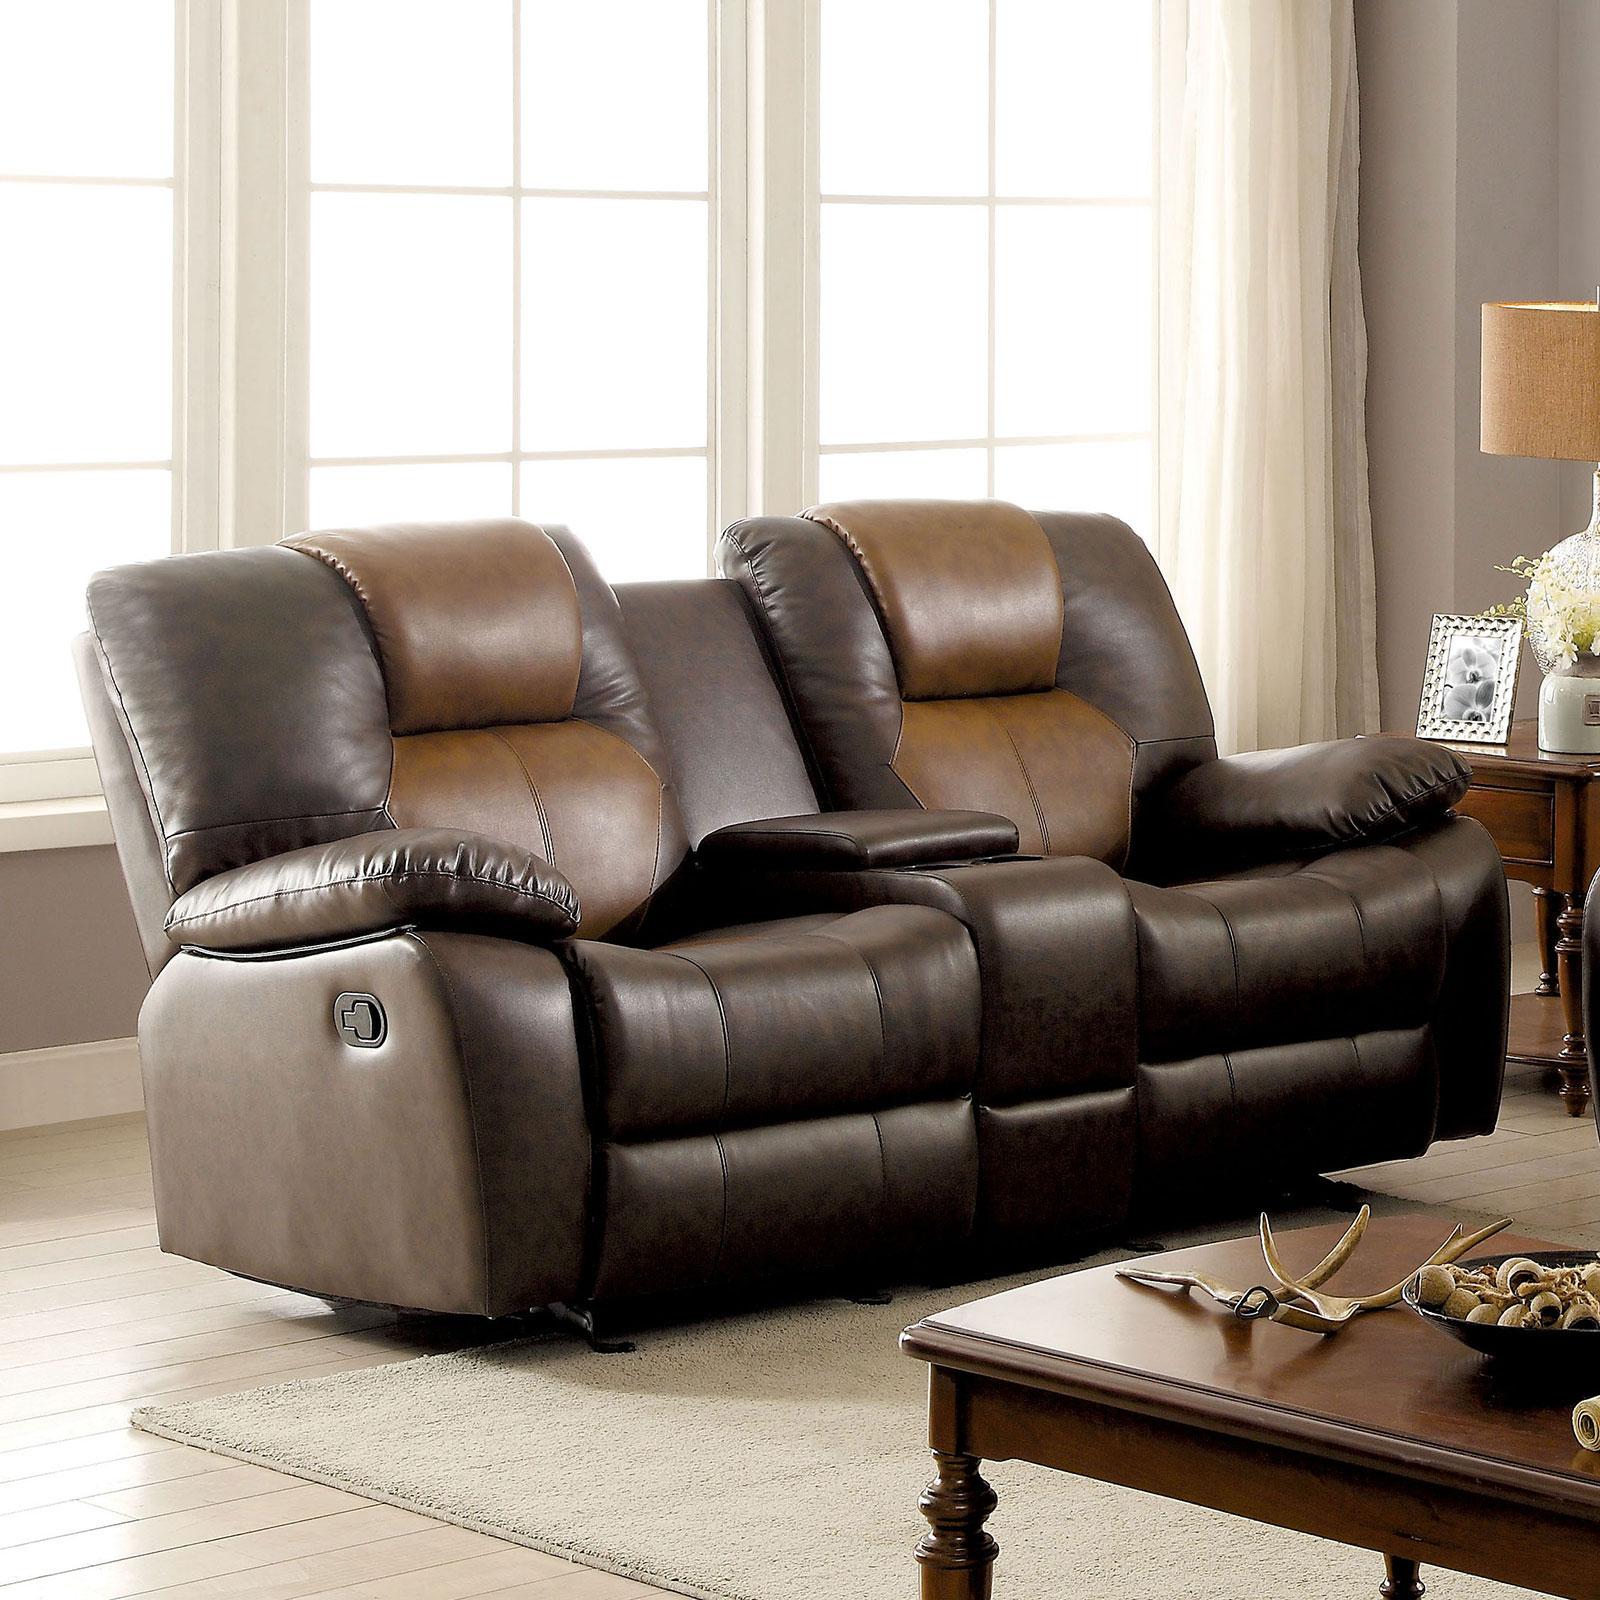 Transitional Reclining Loveseat POLLUX CM6864-LV CM6864-LV in Brown Faux Leather